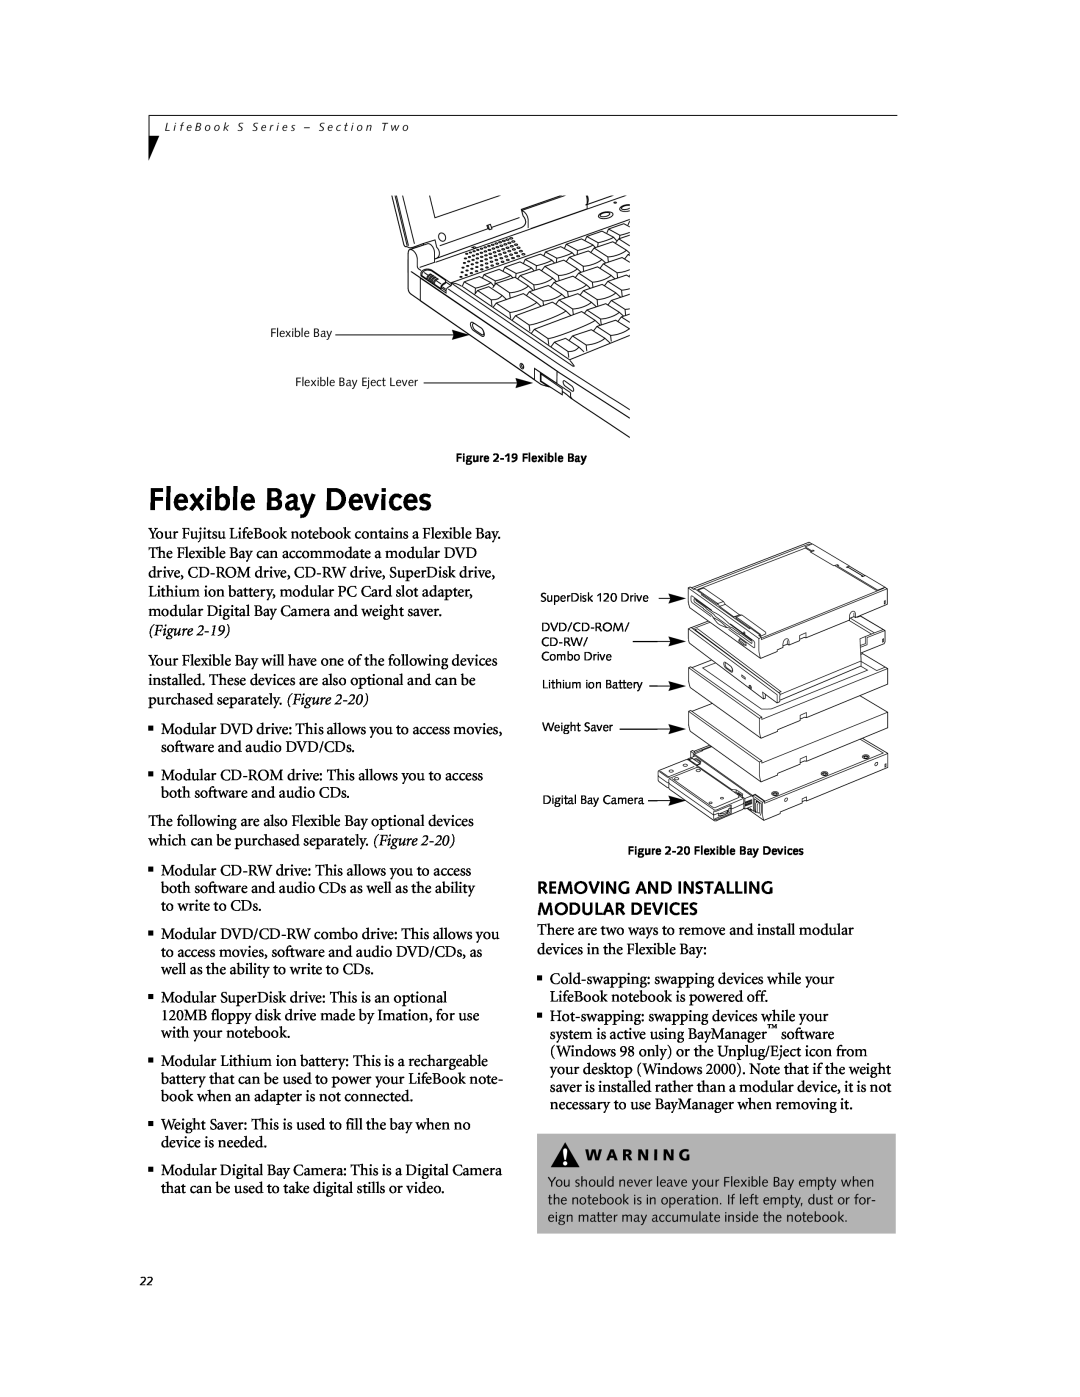 Fujitsu DVD Player manual Flexible Bay Devices, Removing And Installing Modular Devices, W A R N I N G 